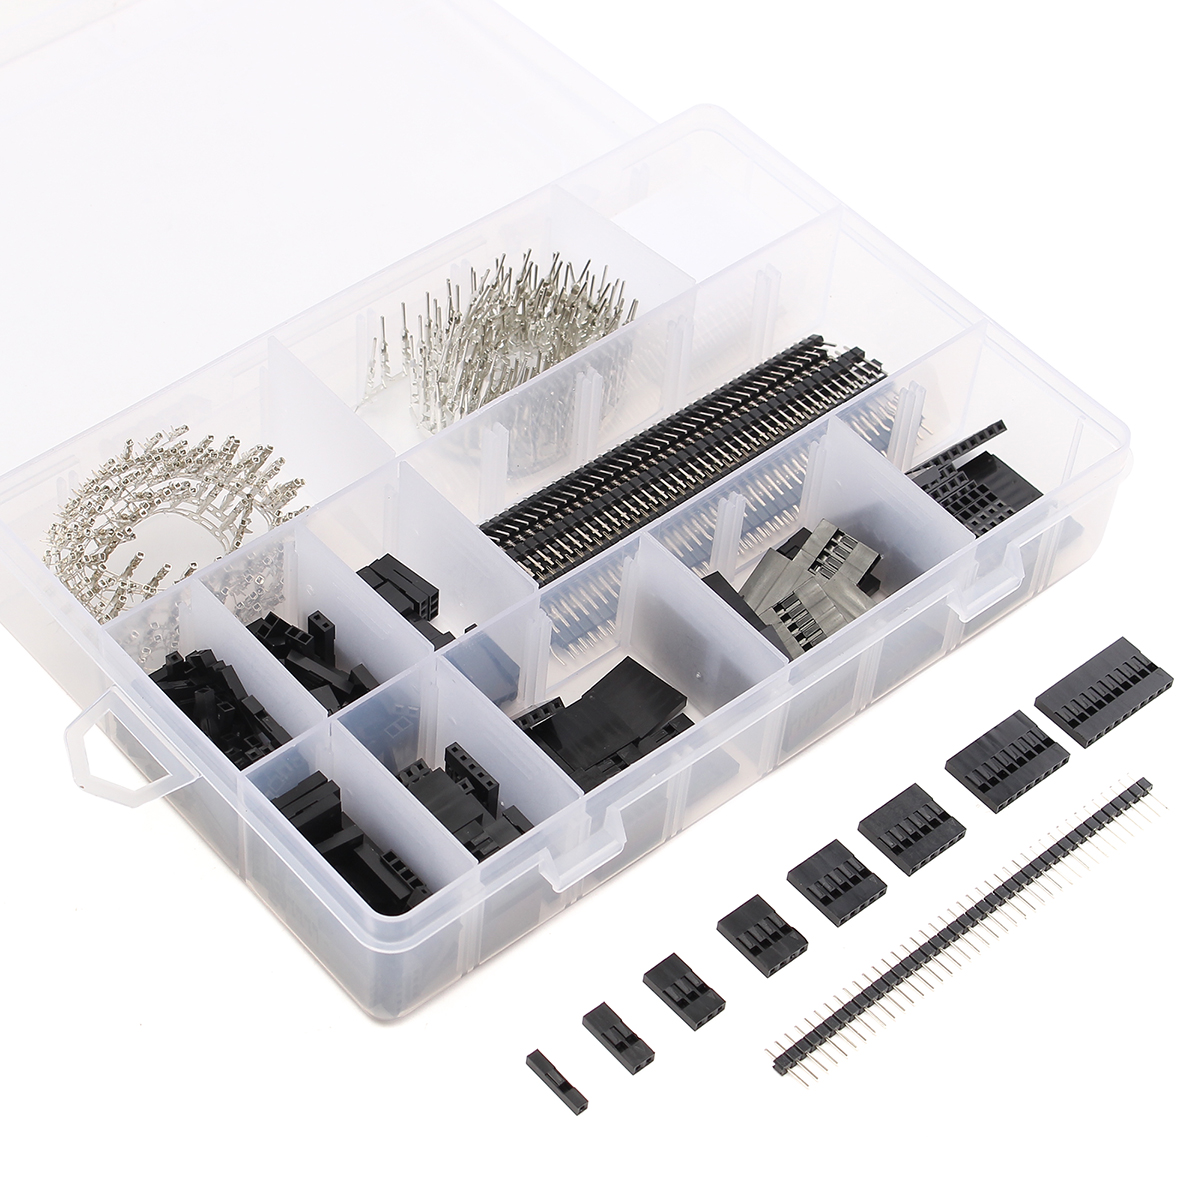 

525Pcs 2.54mm Wire Jumper Pin Header Connectors Housing Female Kit And M/F Crimp Pins